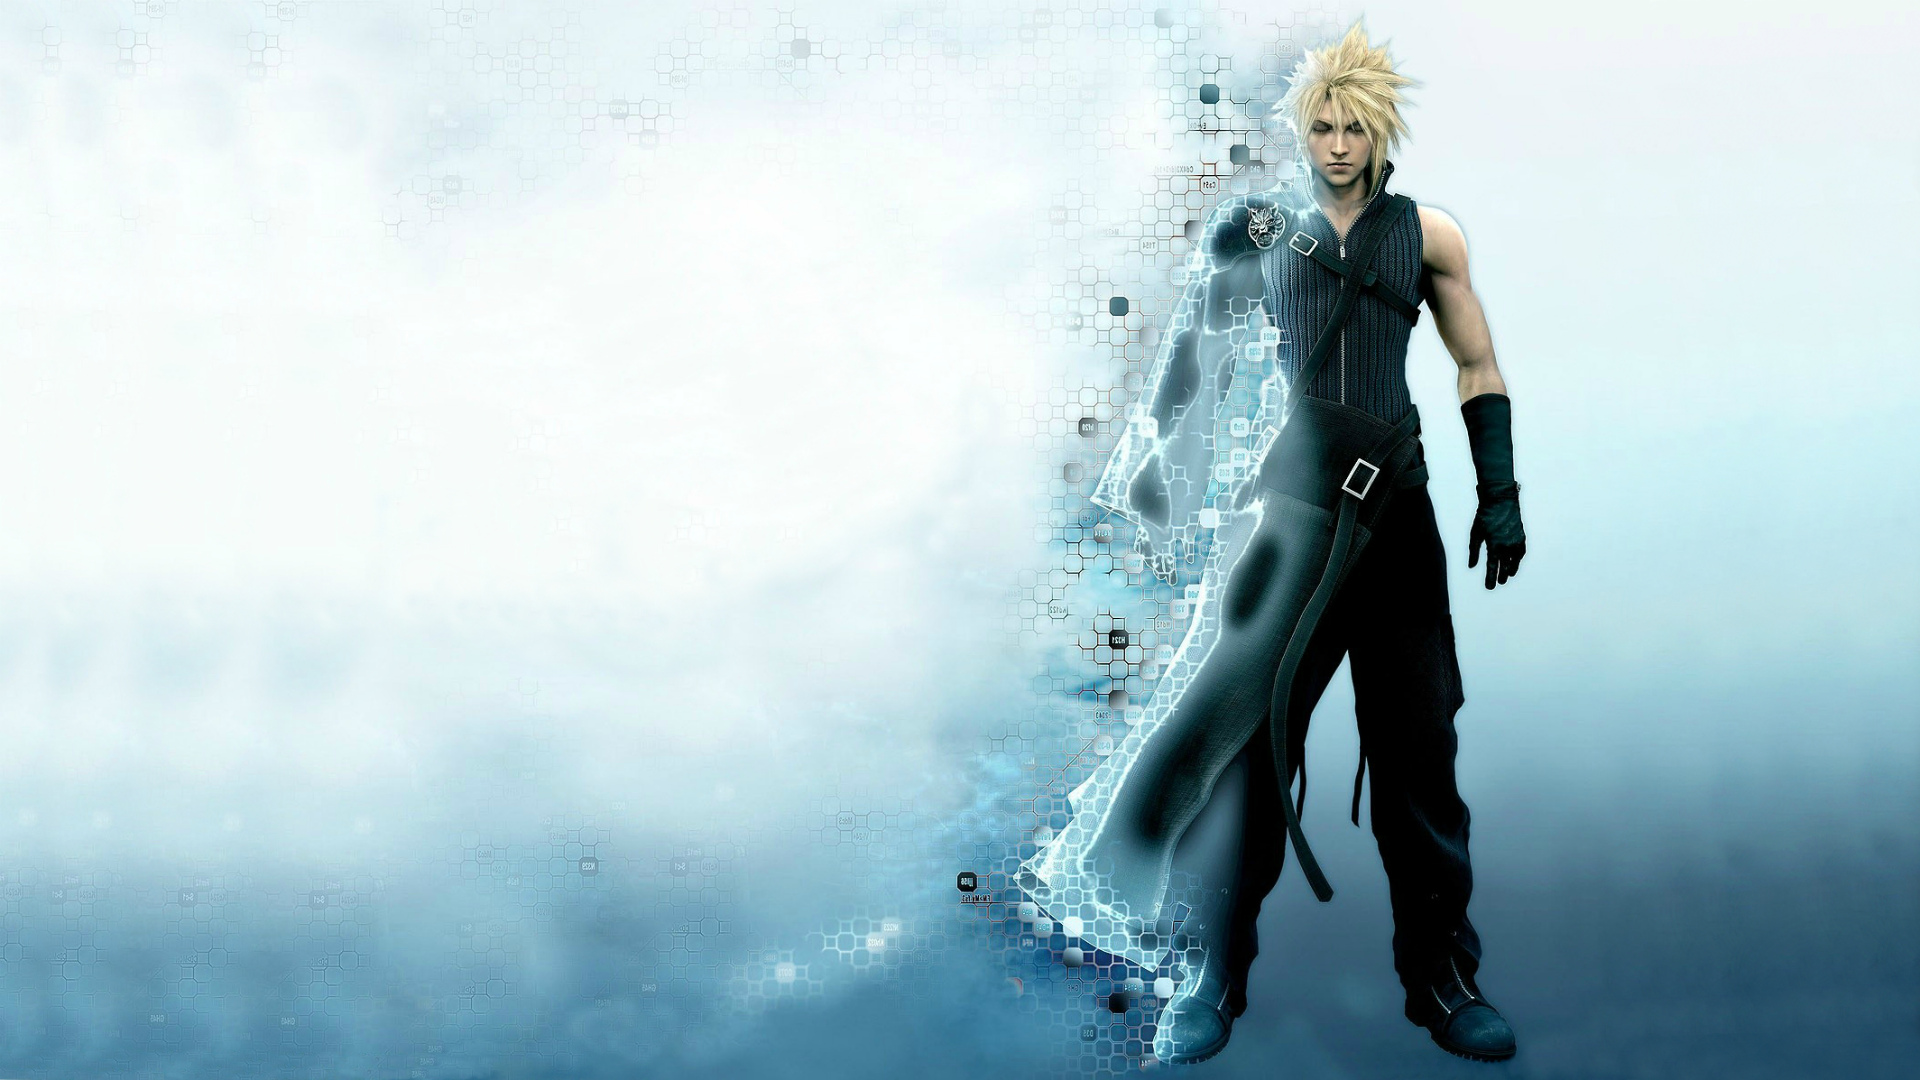 The Best Final Fantasy XVI Wallpapers You Need for Your Desktop